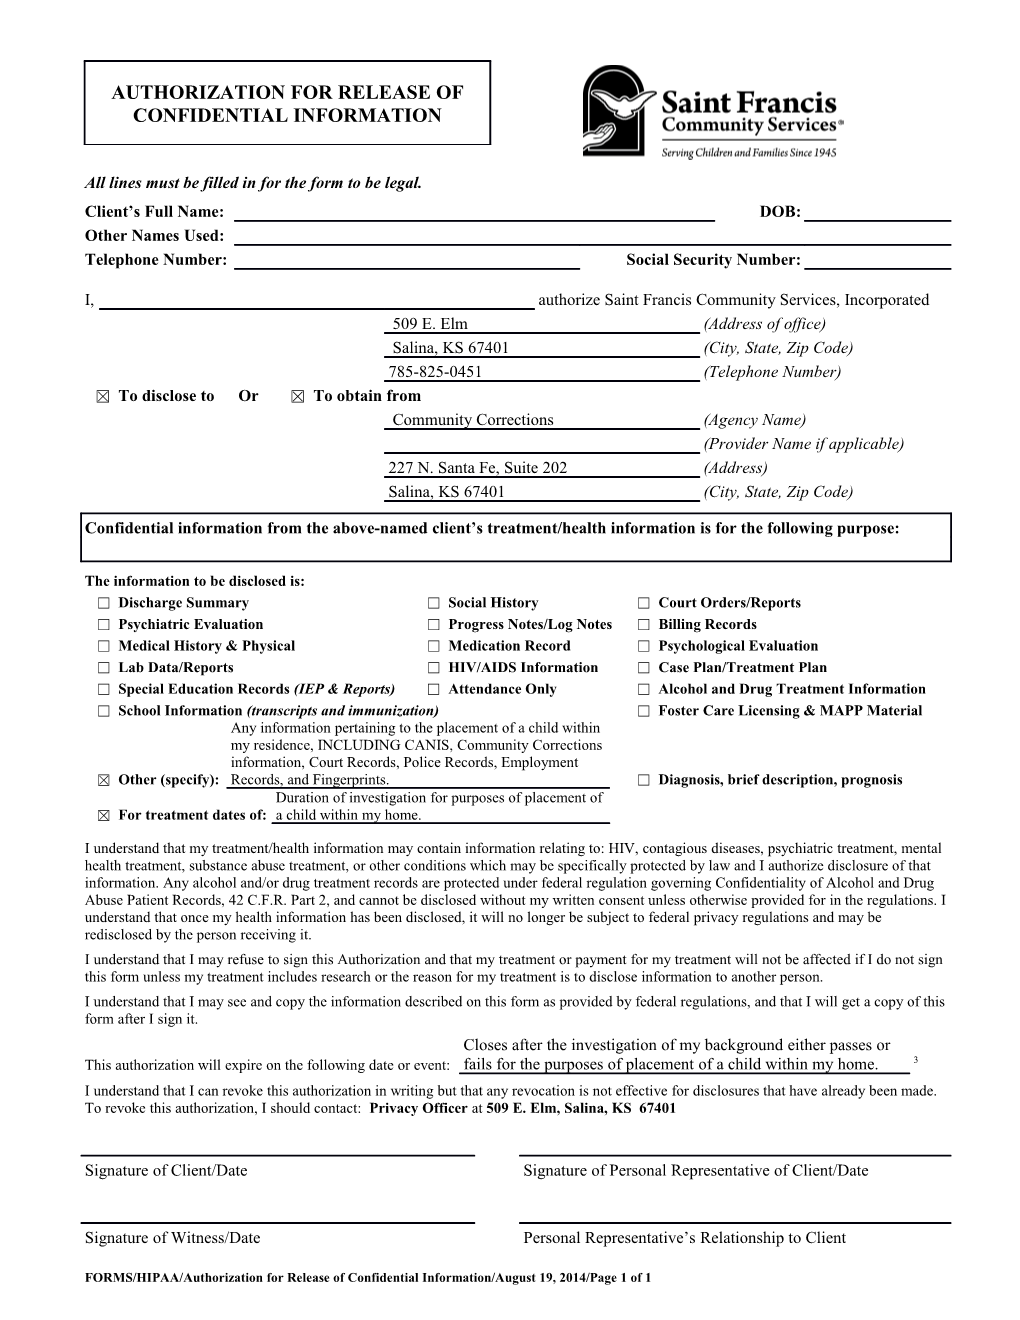 FORMS/HIPAA/Authorization for Release of Confidential Information/August19, 2014/Page 1 of 1